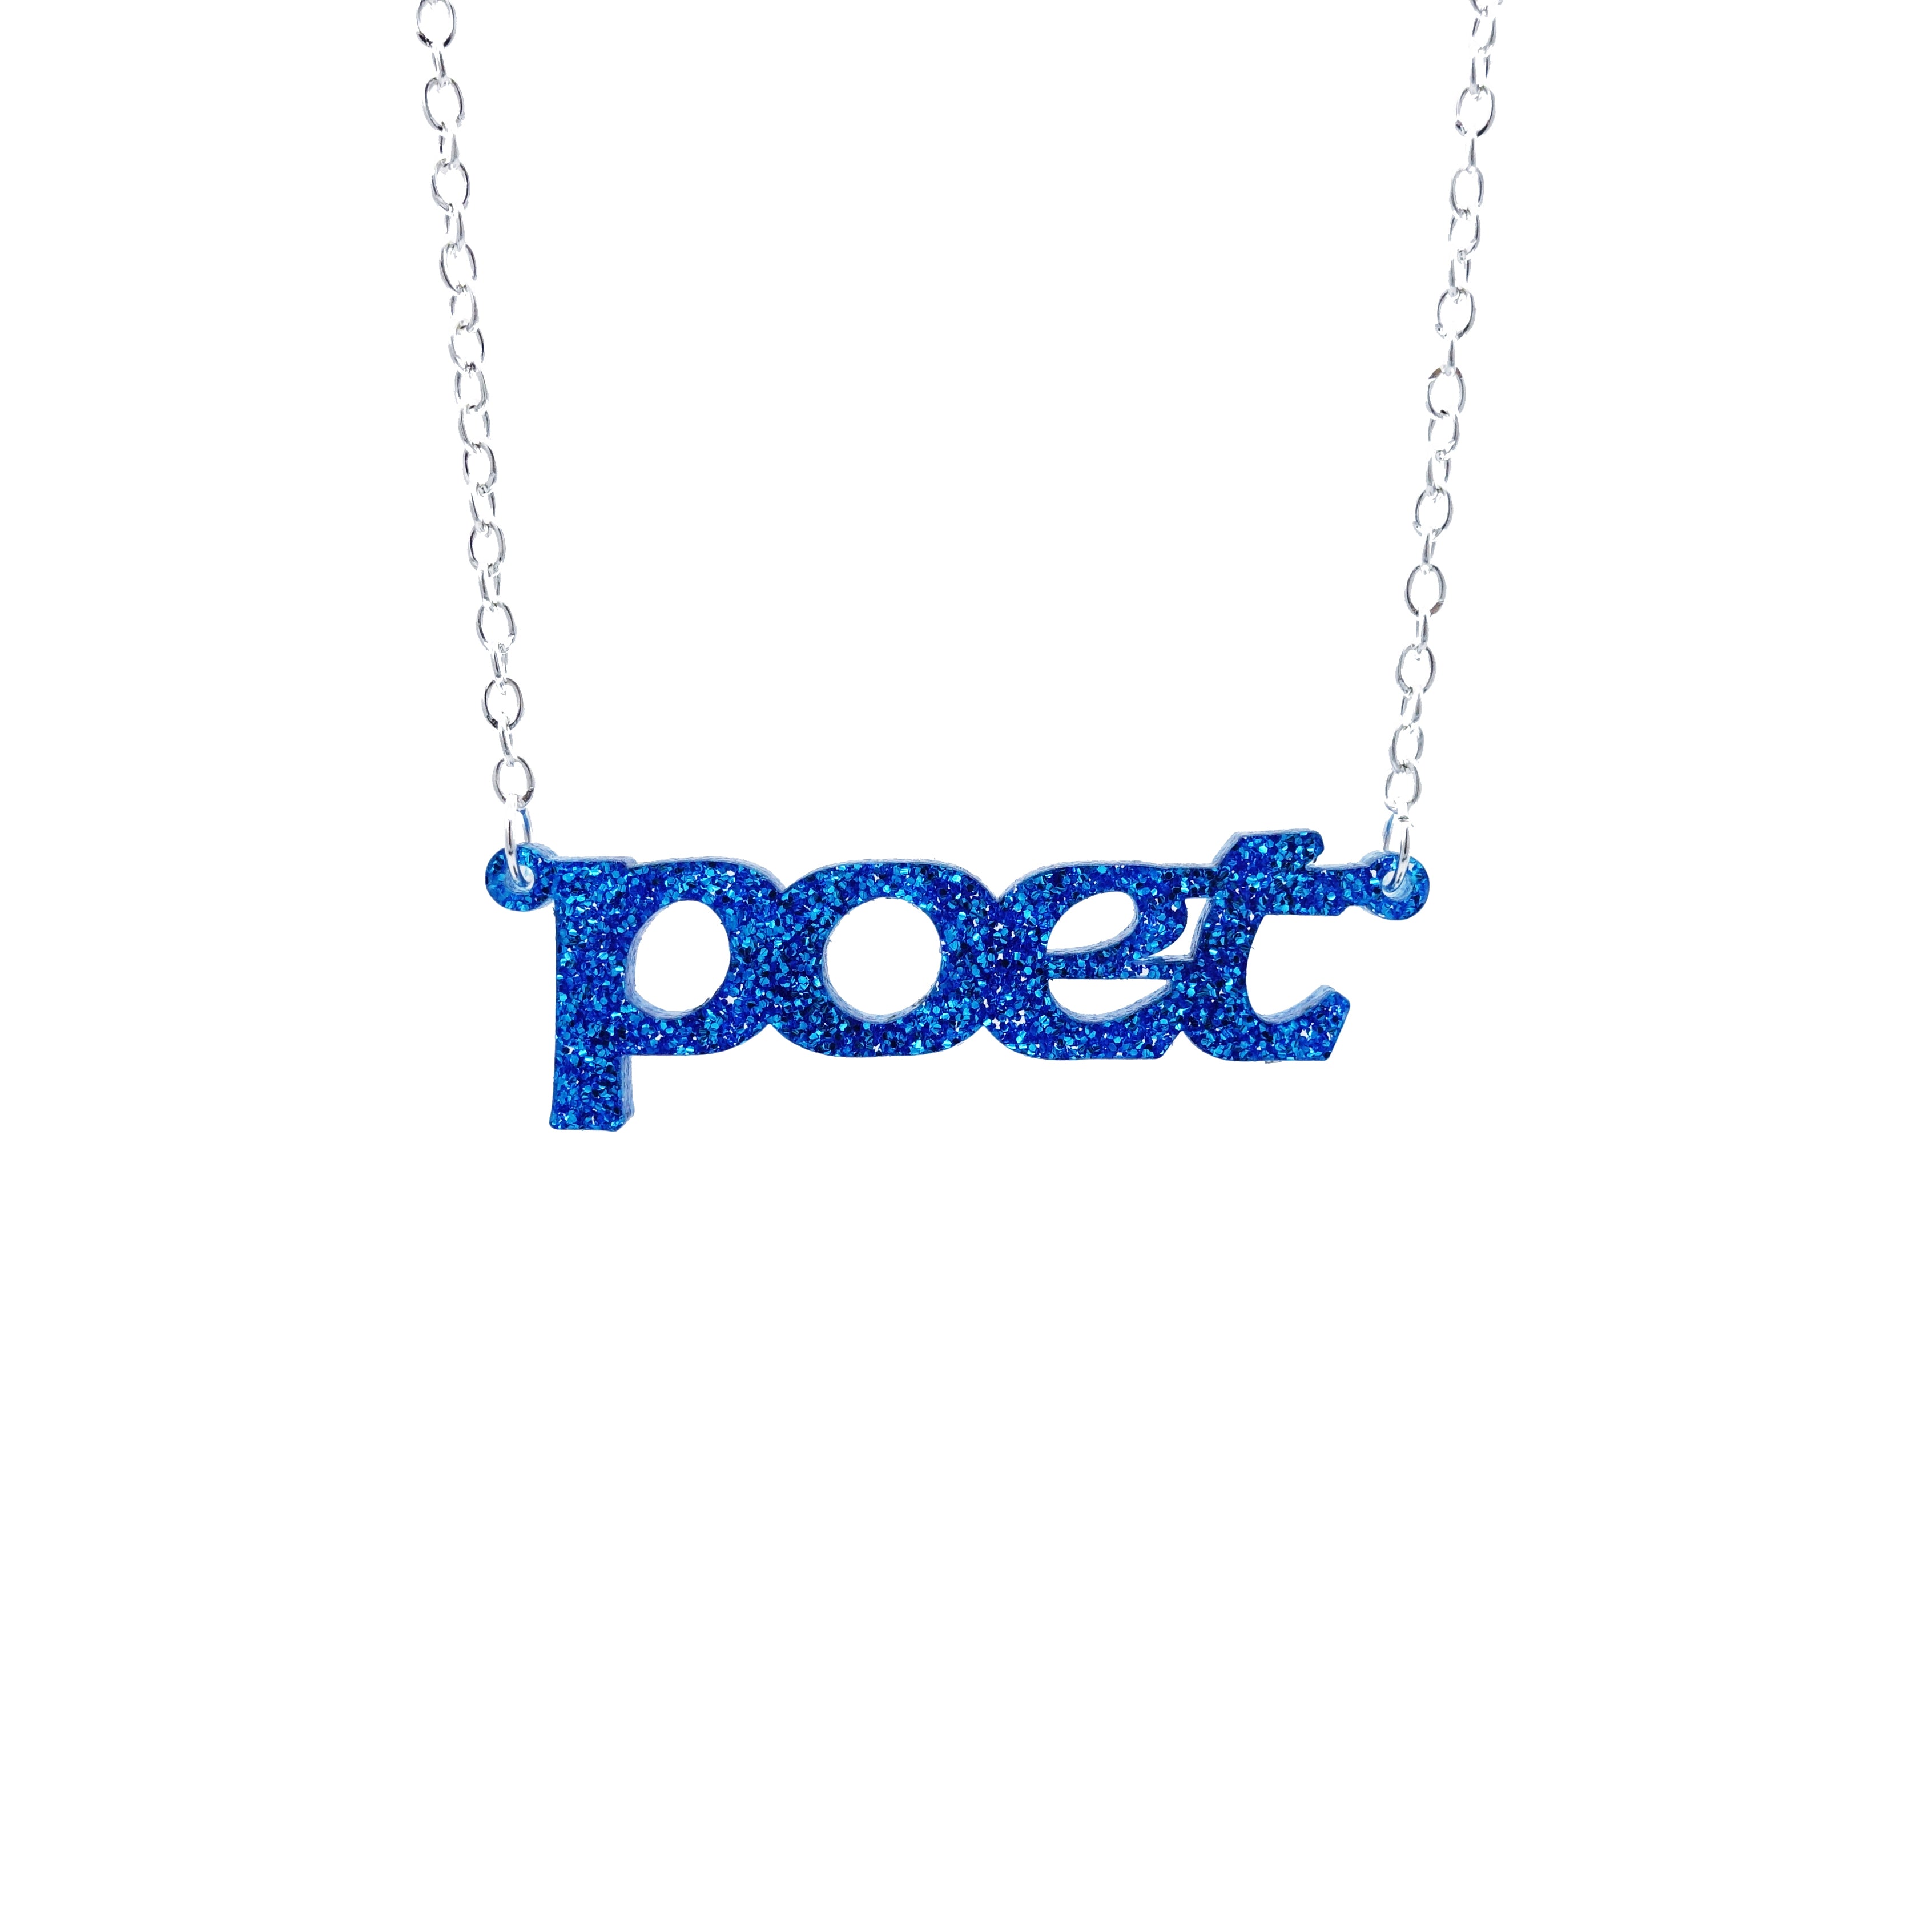 Blue glitter poet necklace shown hanging against a white background. 